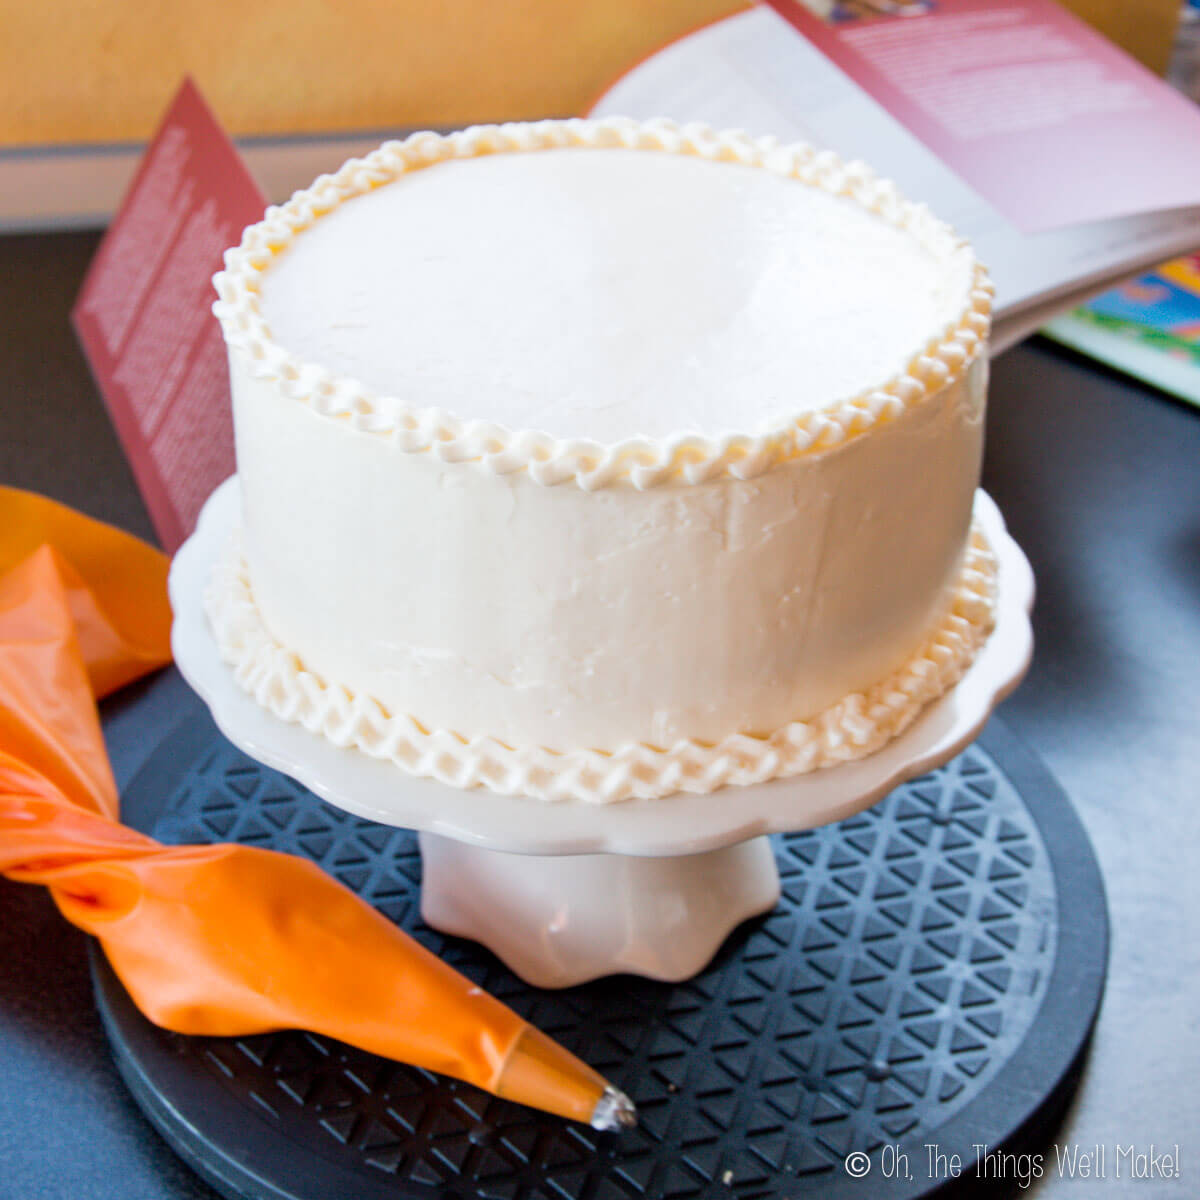 A cake with Swiss buttercream frosting on a cake stand.